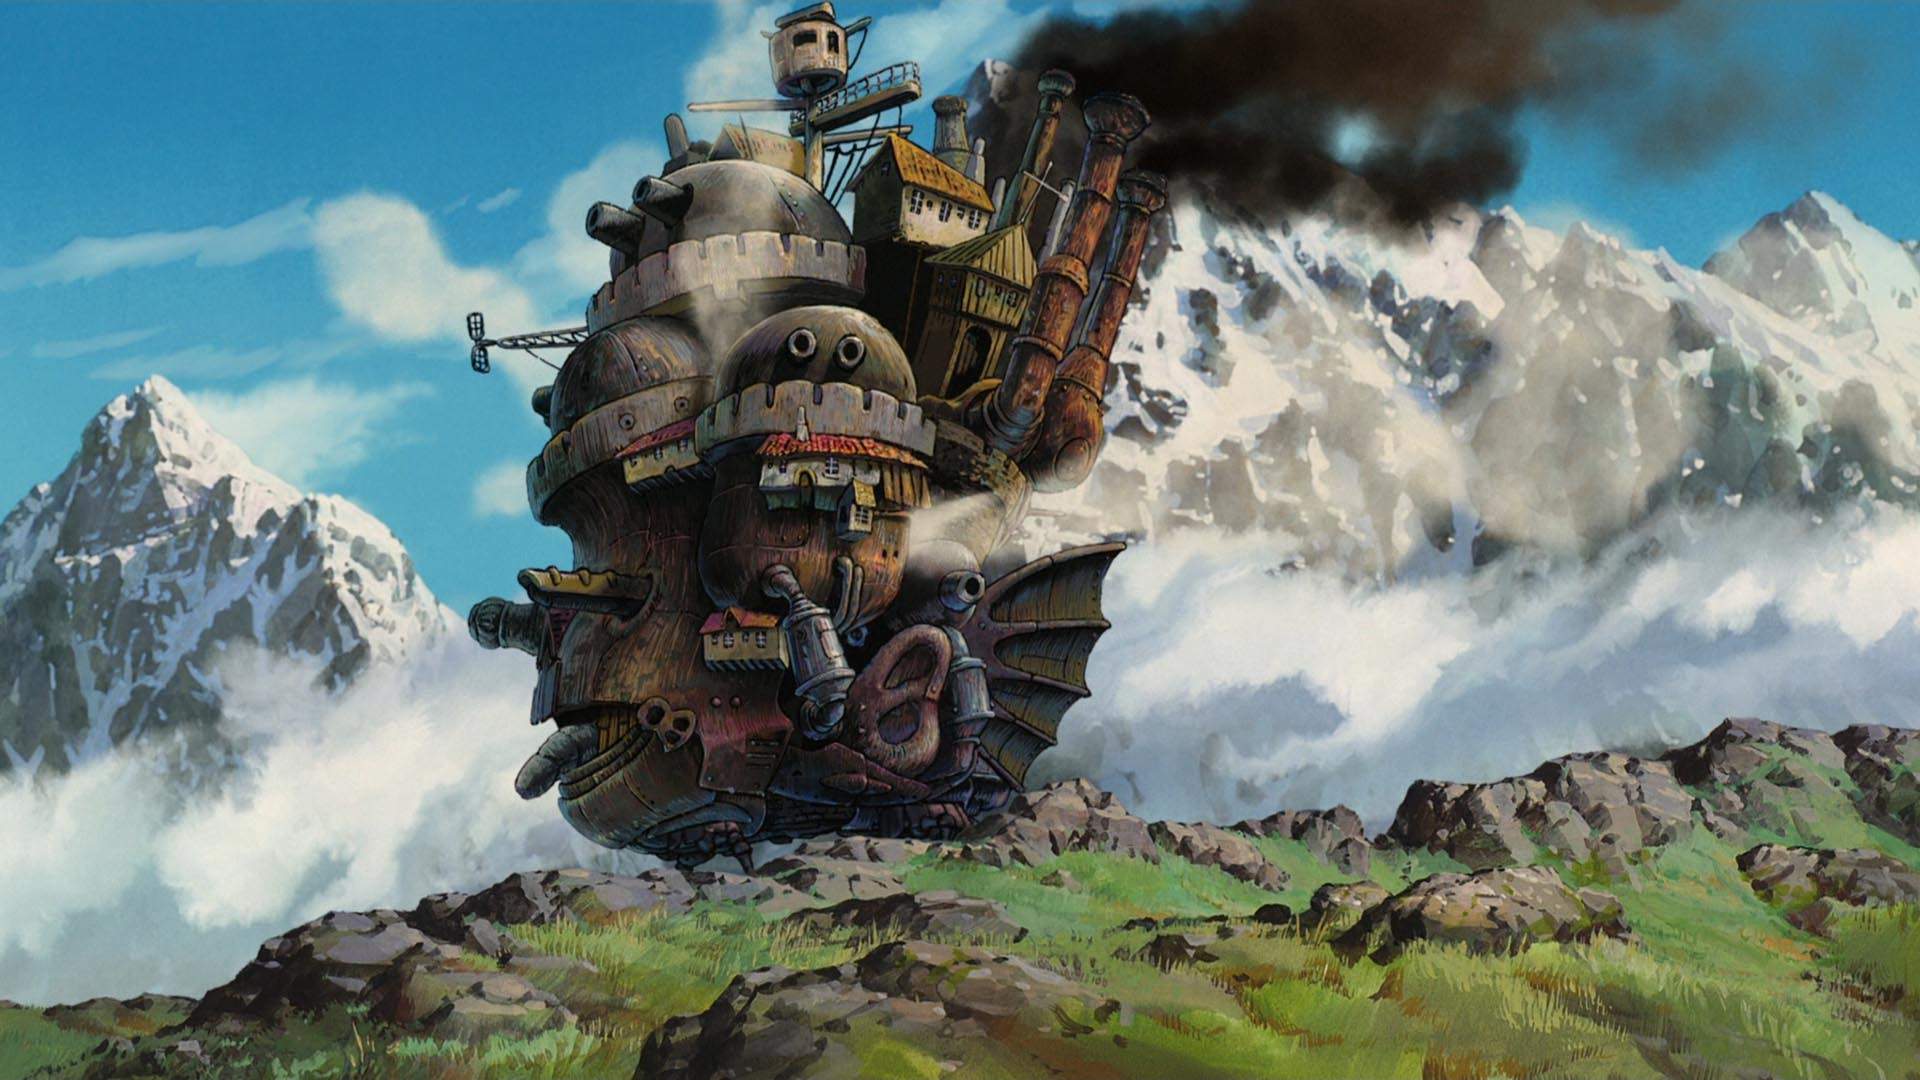 Studio Ghibli's Magical Theme Park Will Feature a Life-Sized Replica of Howl's Moving Castle